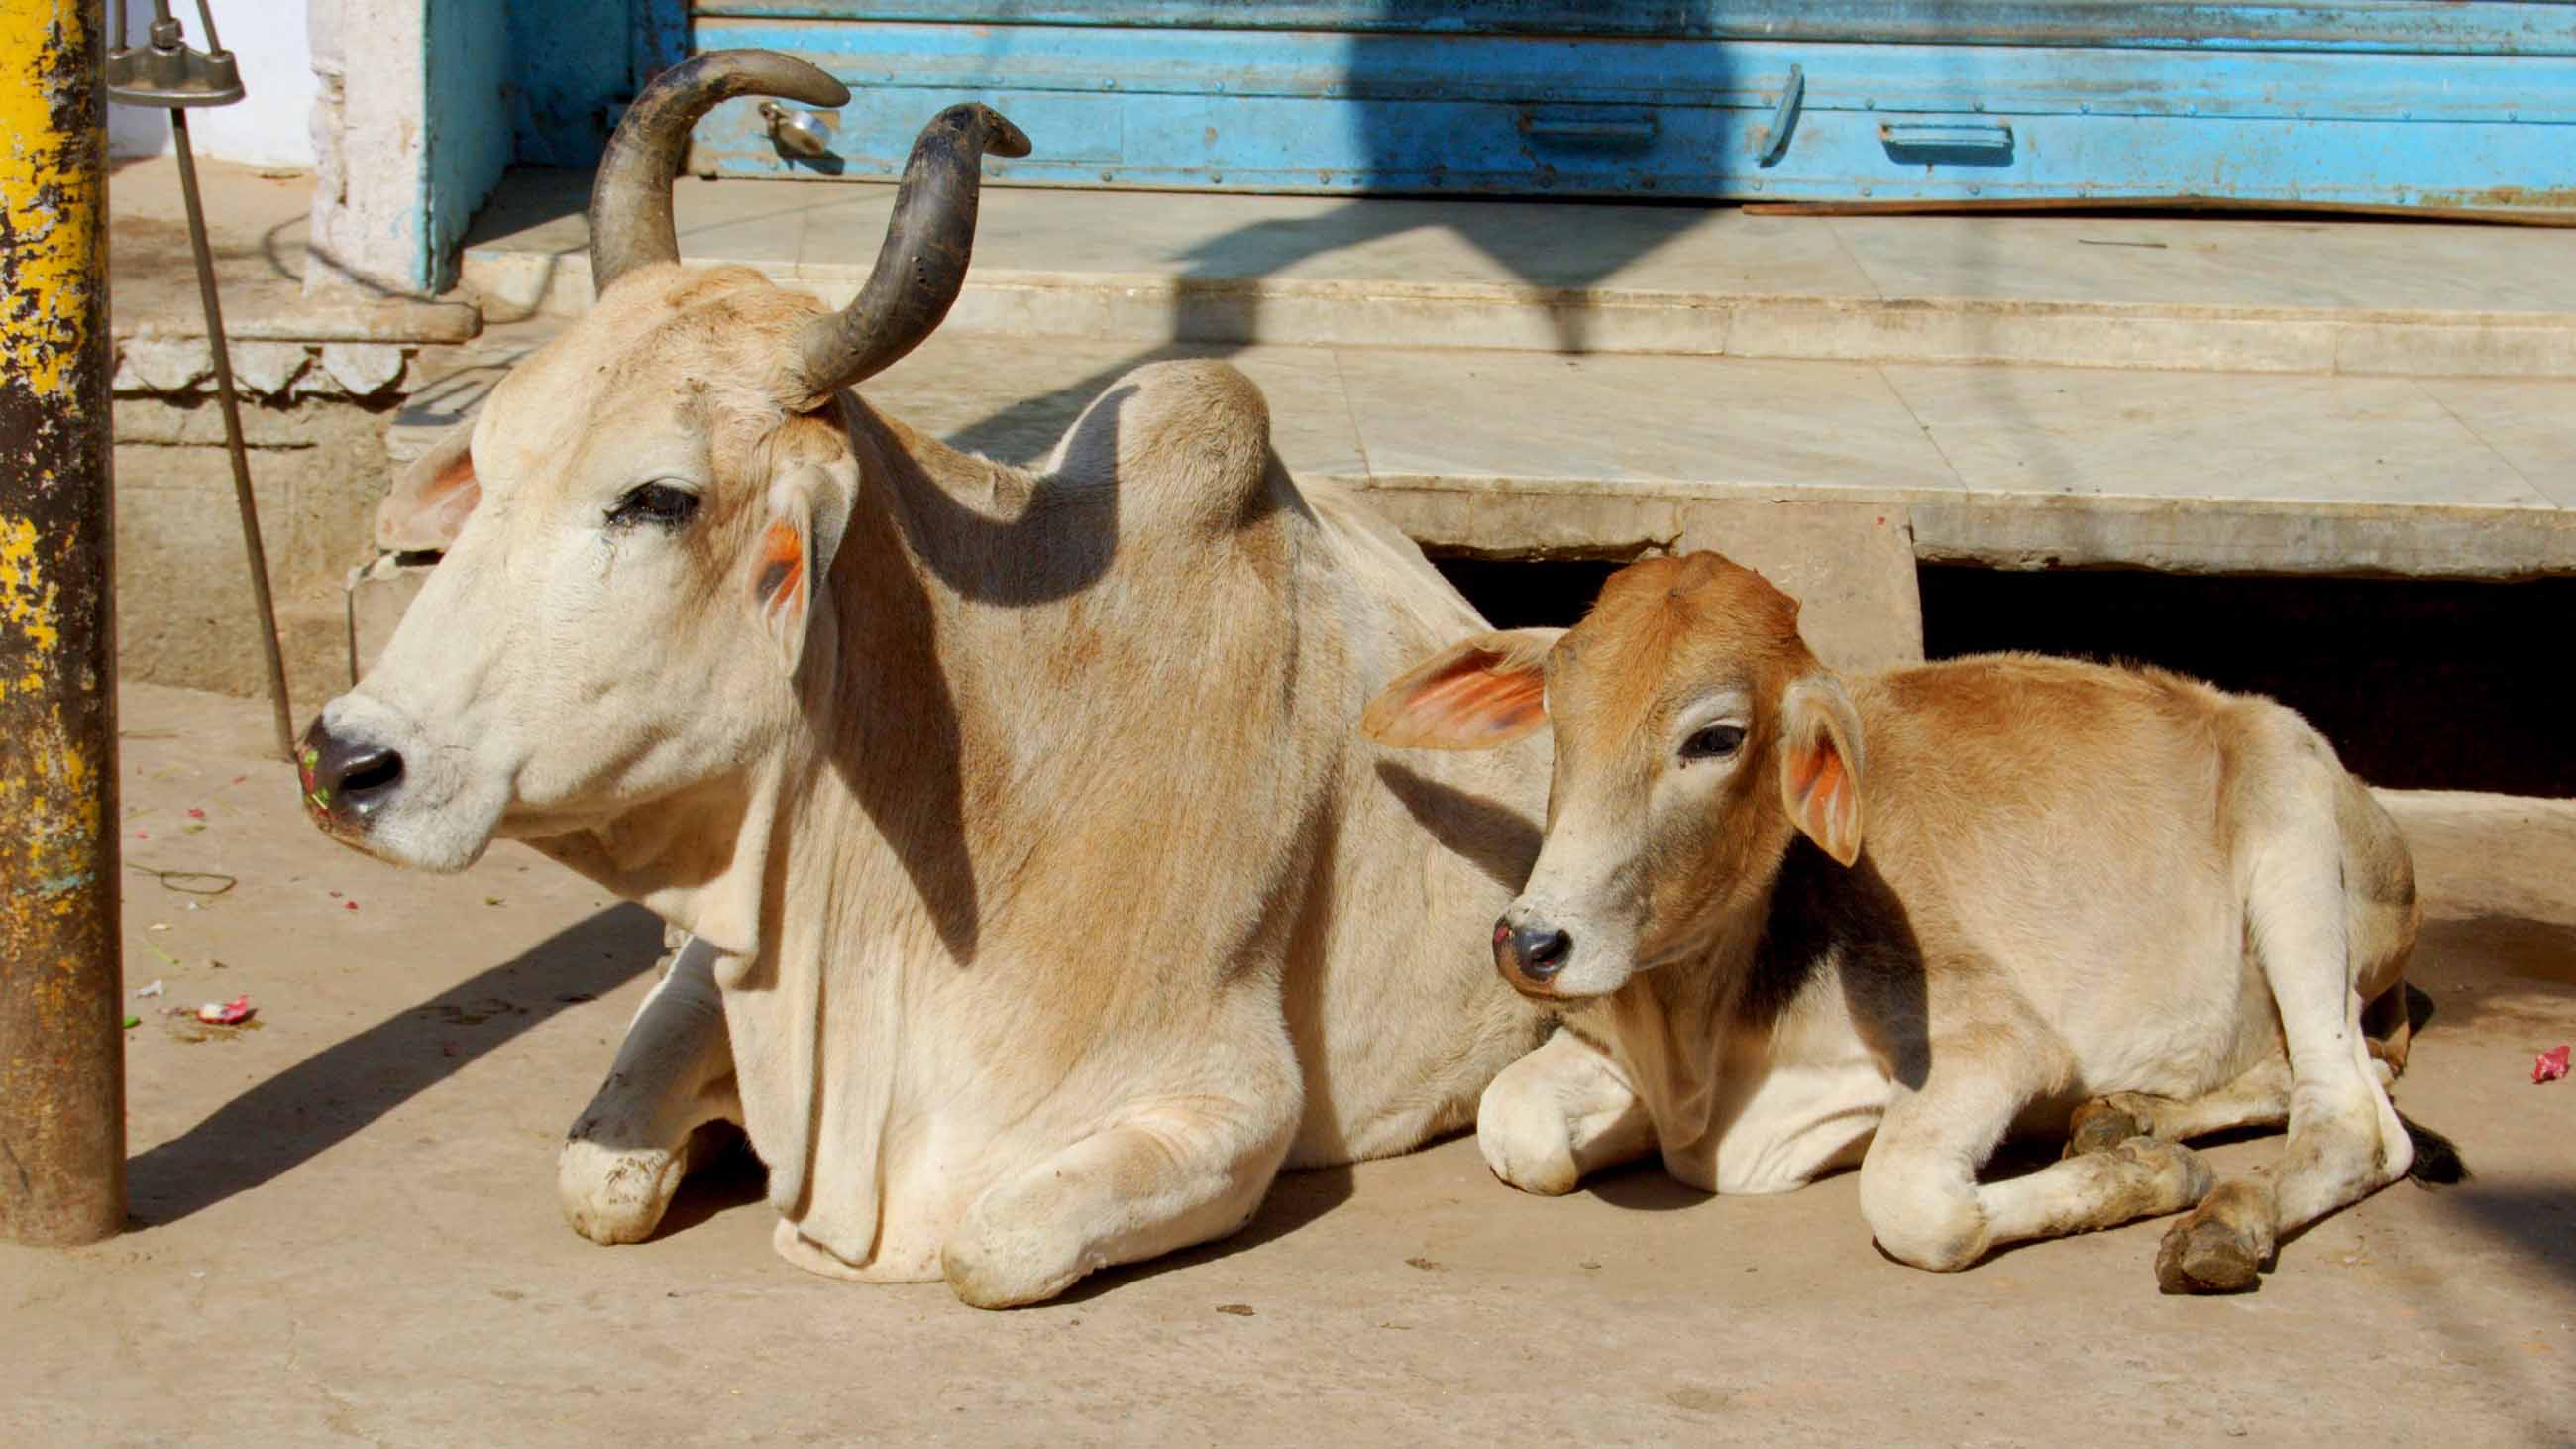 Distilled cow urine, especially from young white virgin cows, has a long history in the traditional Hindu system of medicine known as Ayurveda, or “science of life.”